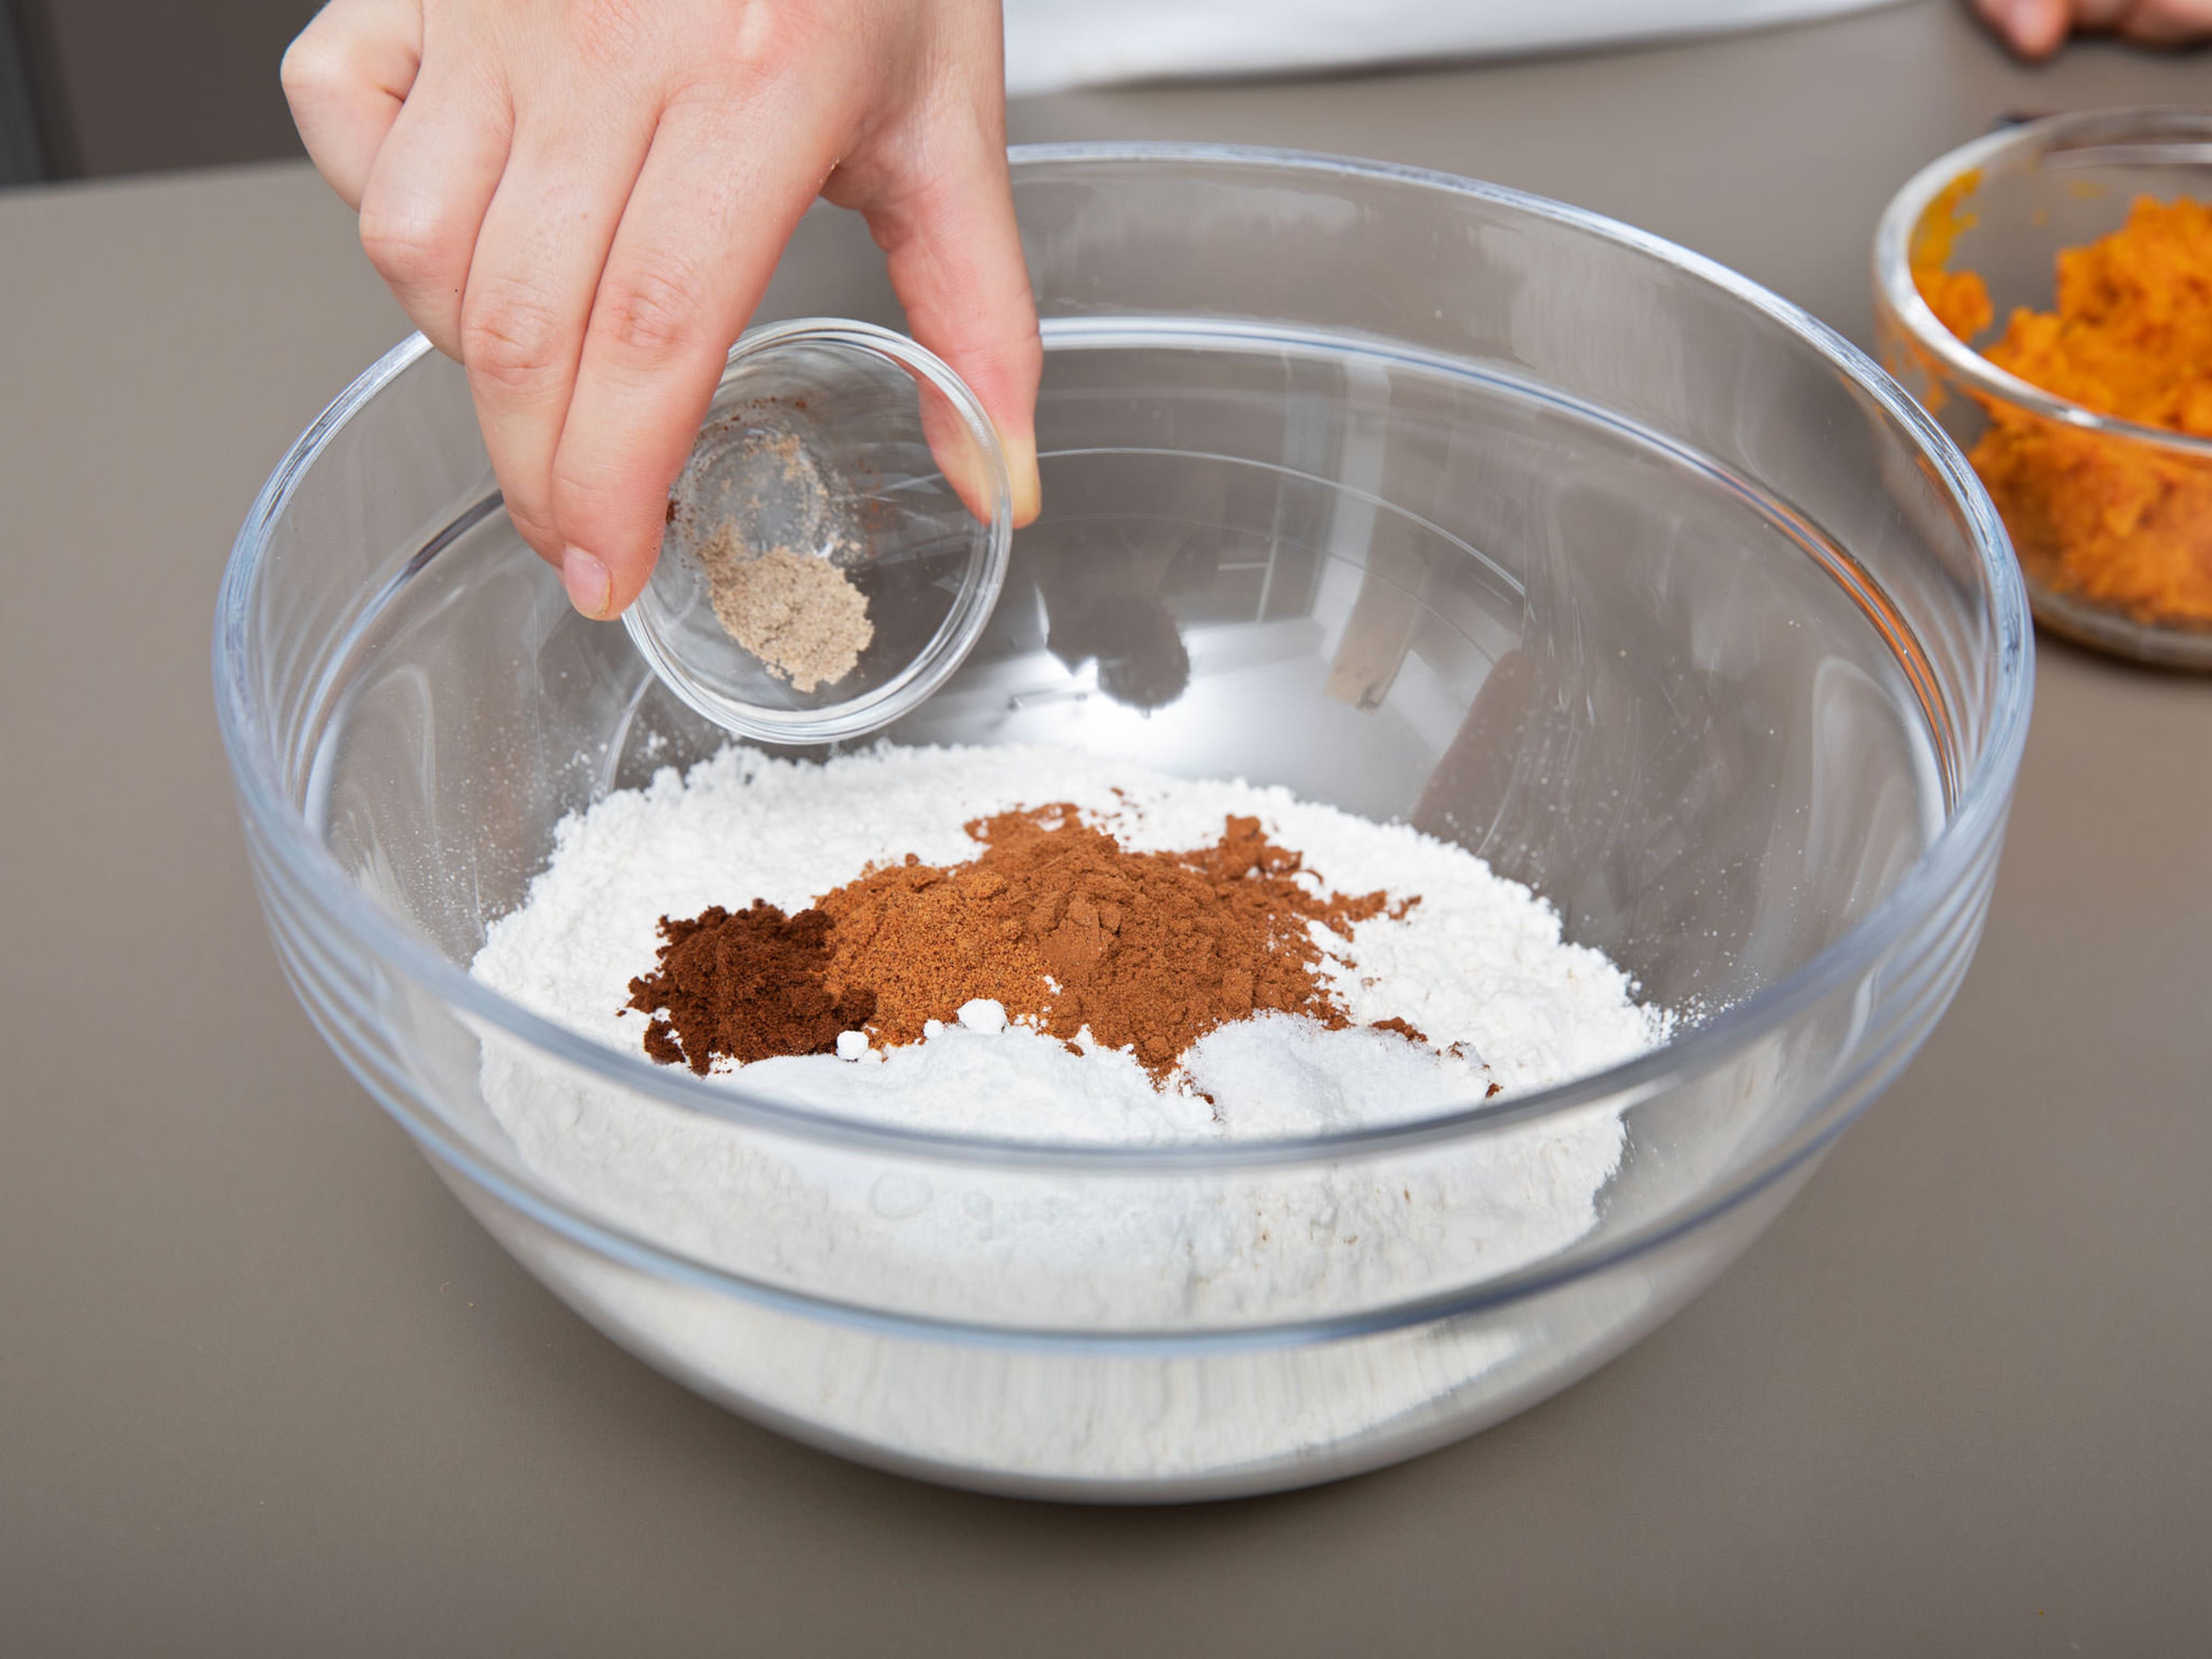 Reduce oven temperature to 175°C/350°F. Chop walnuts and set aside. Add flour, ground cinnamon, nutmeg, cloves, cardamom, baking powder, baking soda, and salt to a bowl and stir to combine.